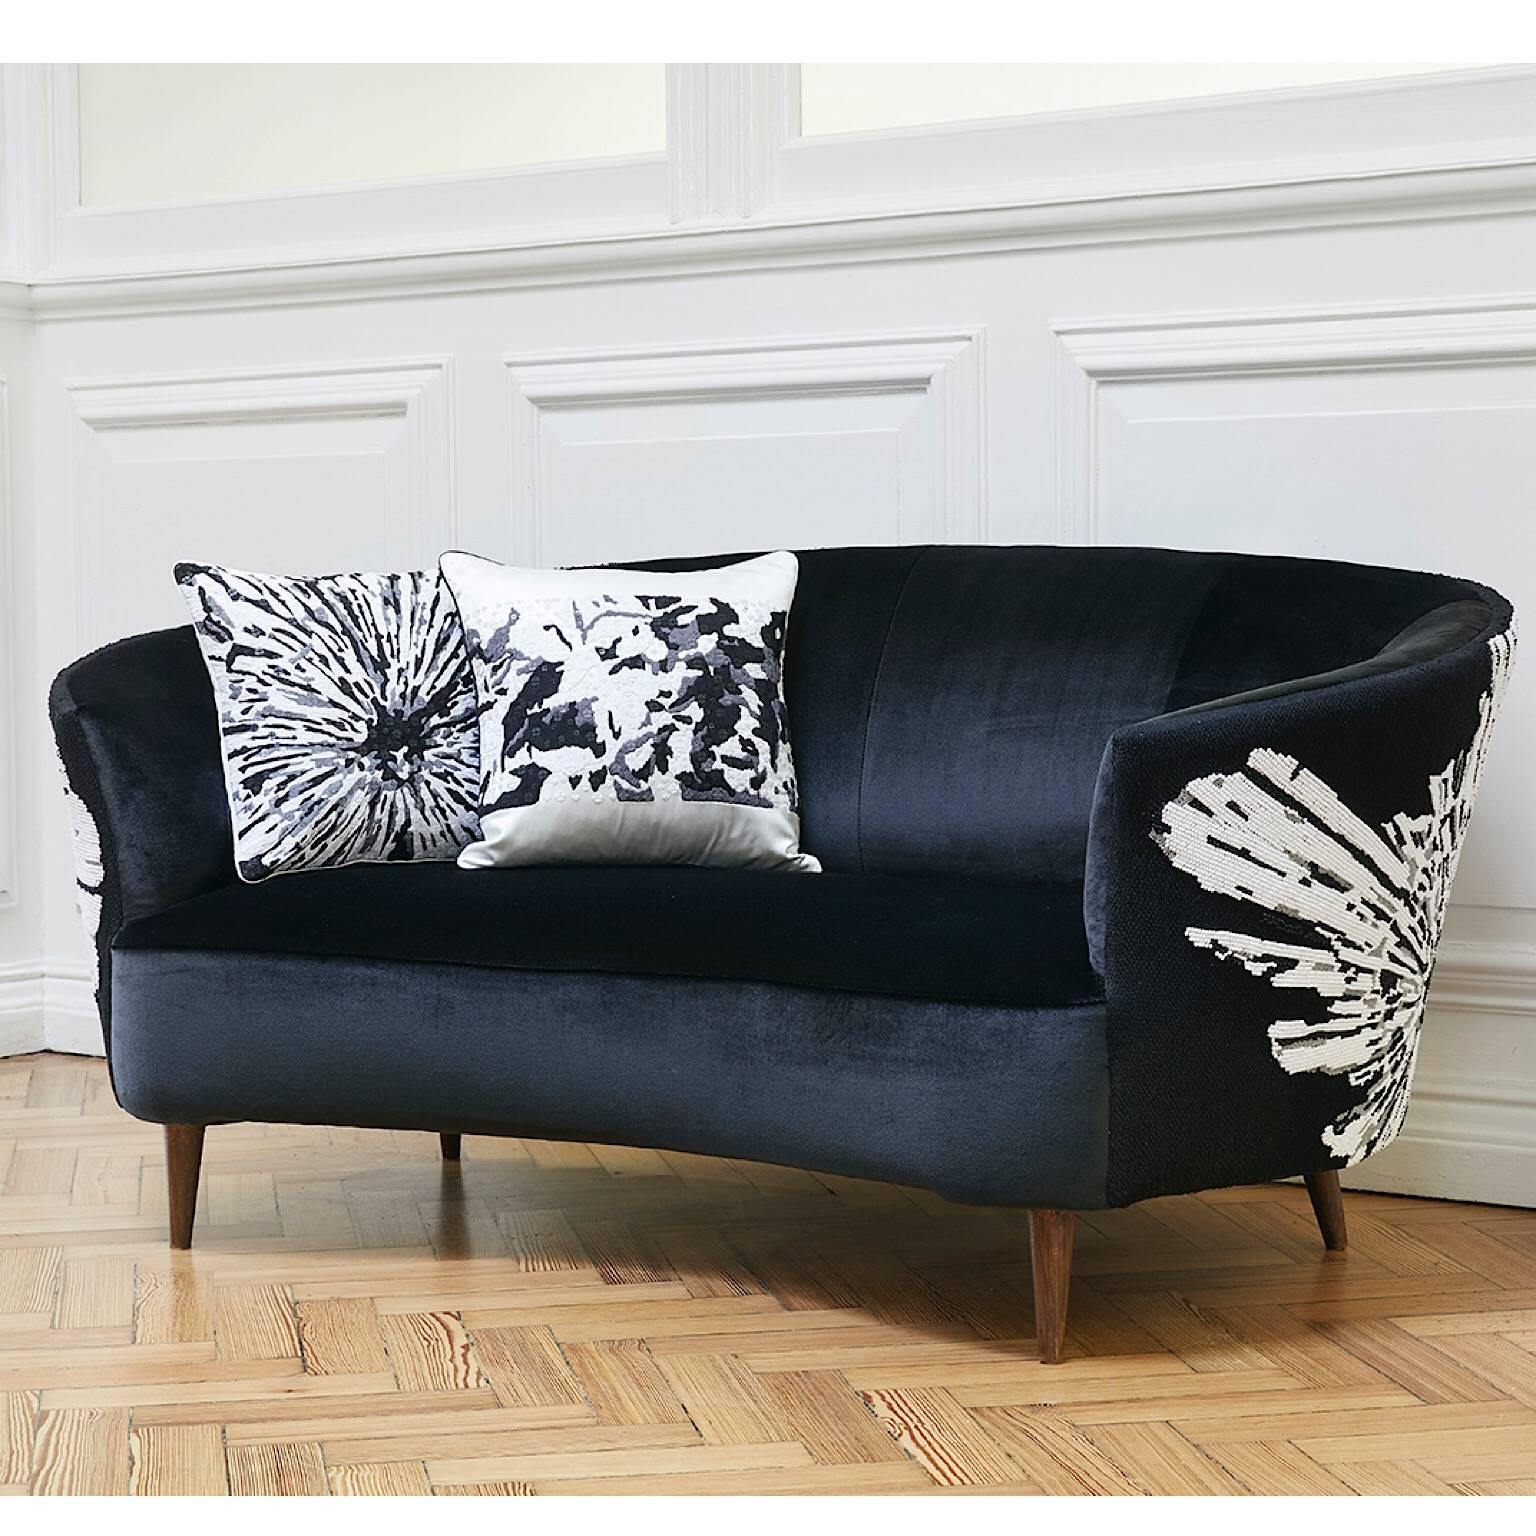 Midcentury Sofa upholstered in black Dedar Splendido velvet with a hand embroidered back.
The embroidery design is an abstract floral using black ,white and transparent super Matt beads
The background is embroidered in a black cotton twisted chain